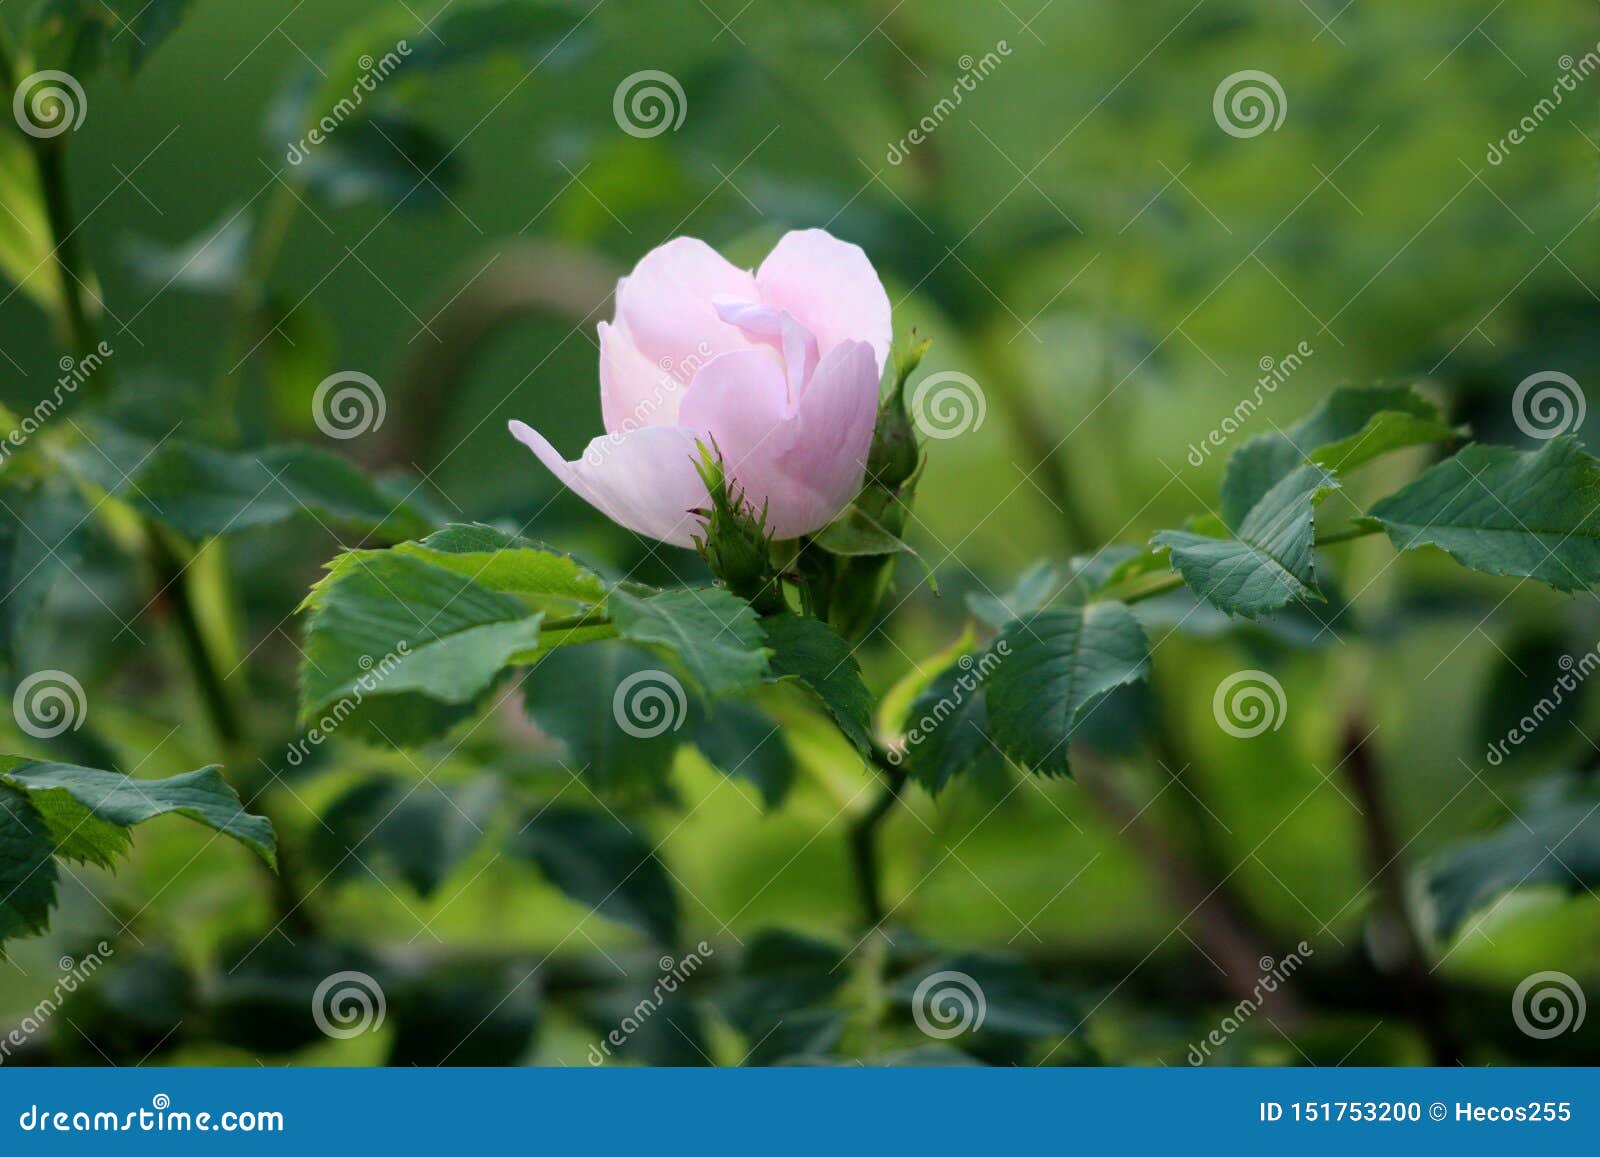 rose hip or rosehip or rose haw or rose hep single pink flower surrounded with dark green leaves planted in local garden